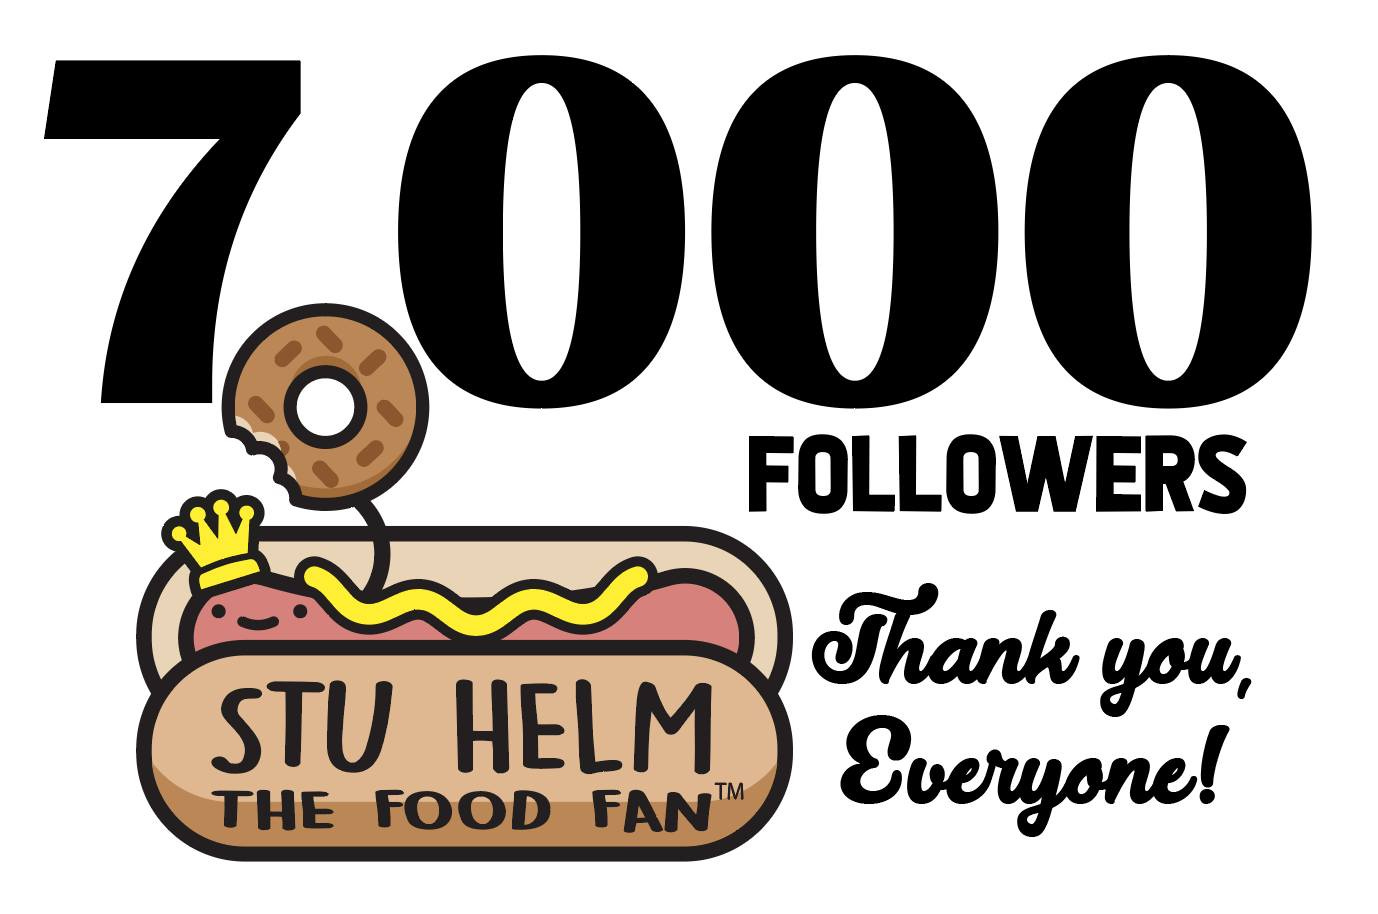 May be an image of text that says '000 FOLLOWERS Thank you, Everyone! STU HELM THE FOOD FAN'